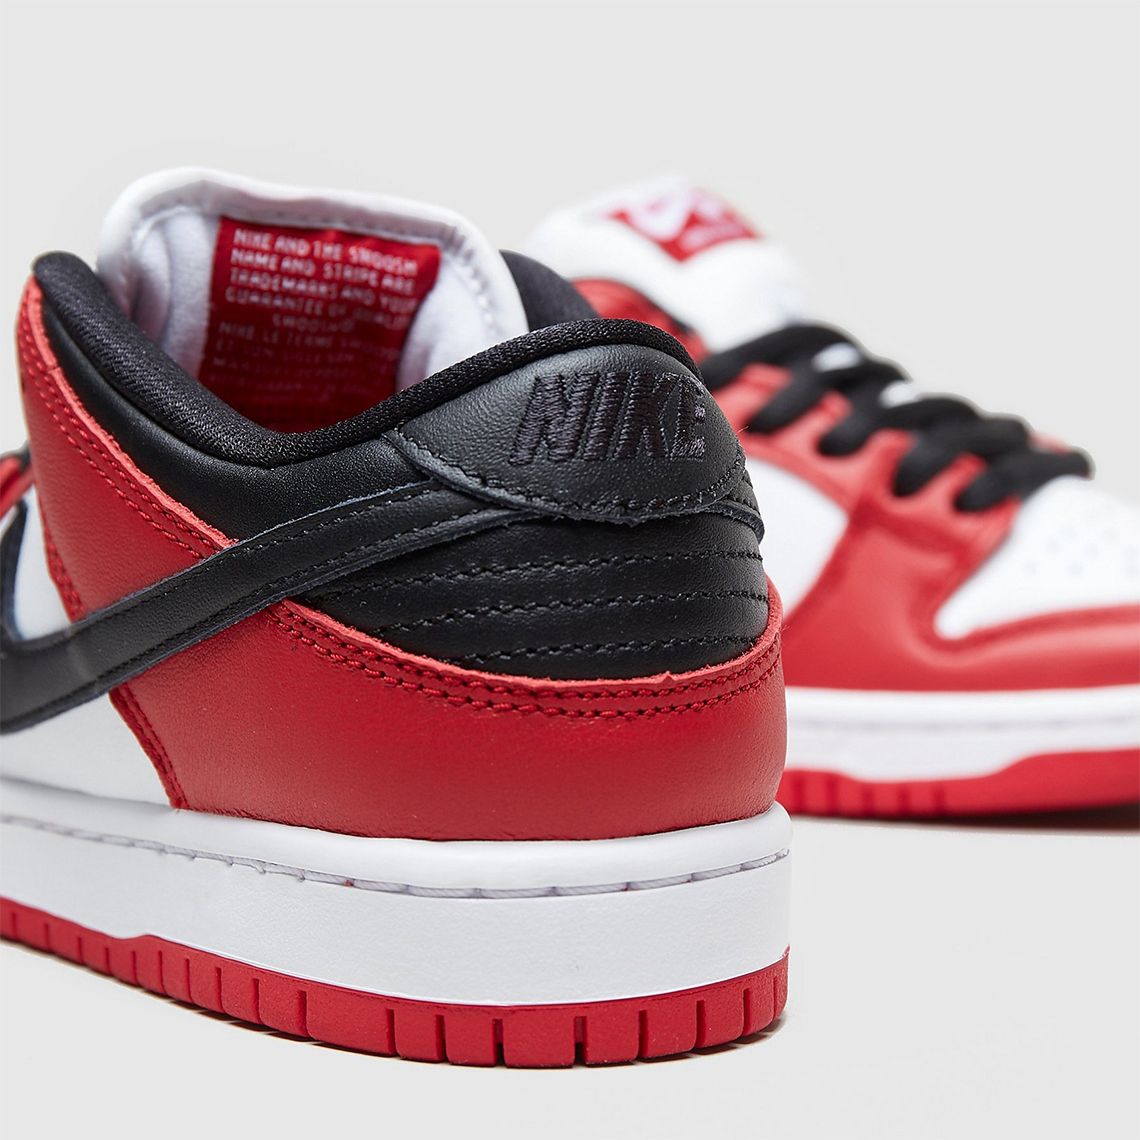 Where to Buy the Nike SB Dunk Low “Chicago” | HOUSE OF HEAT